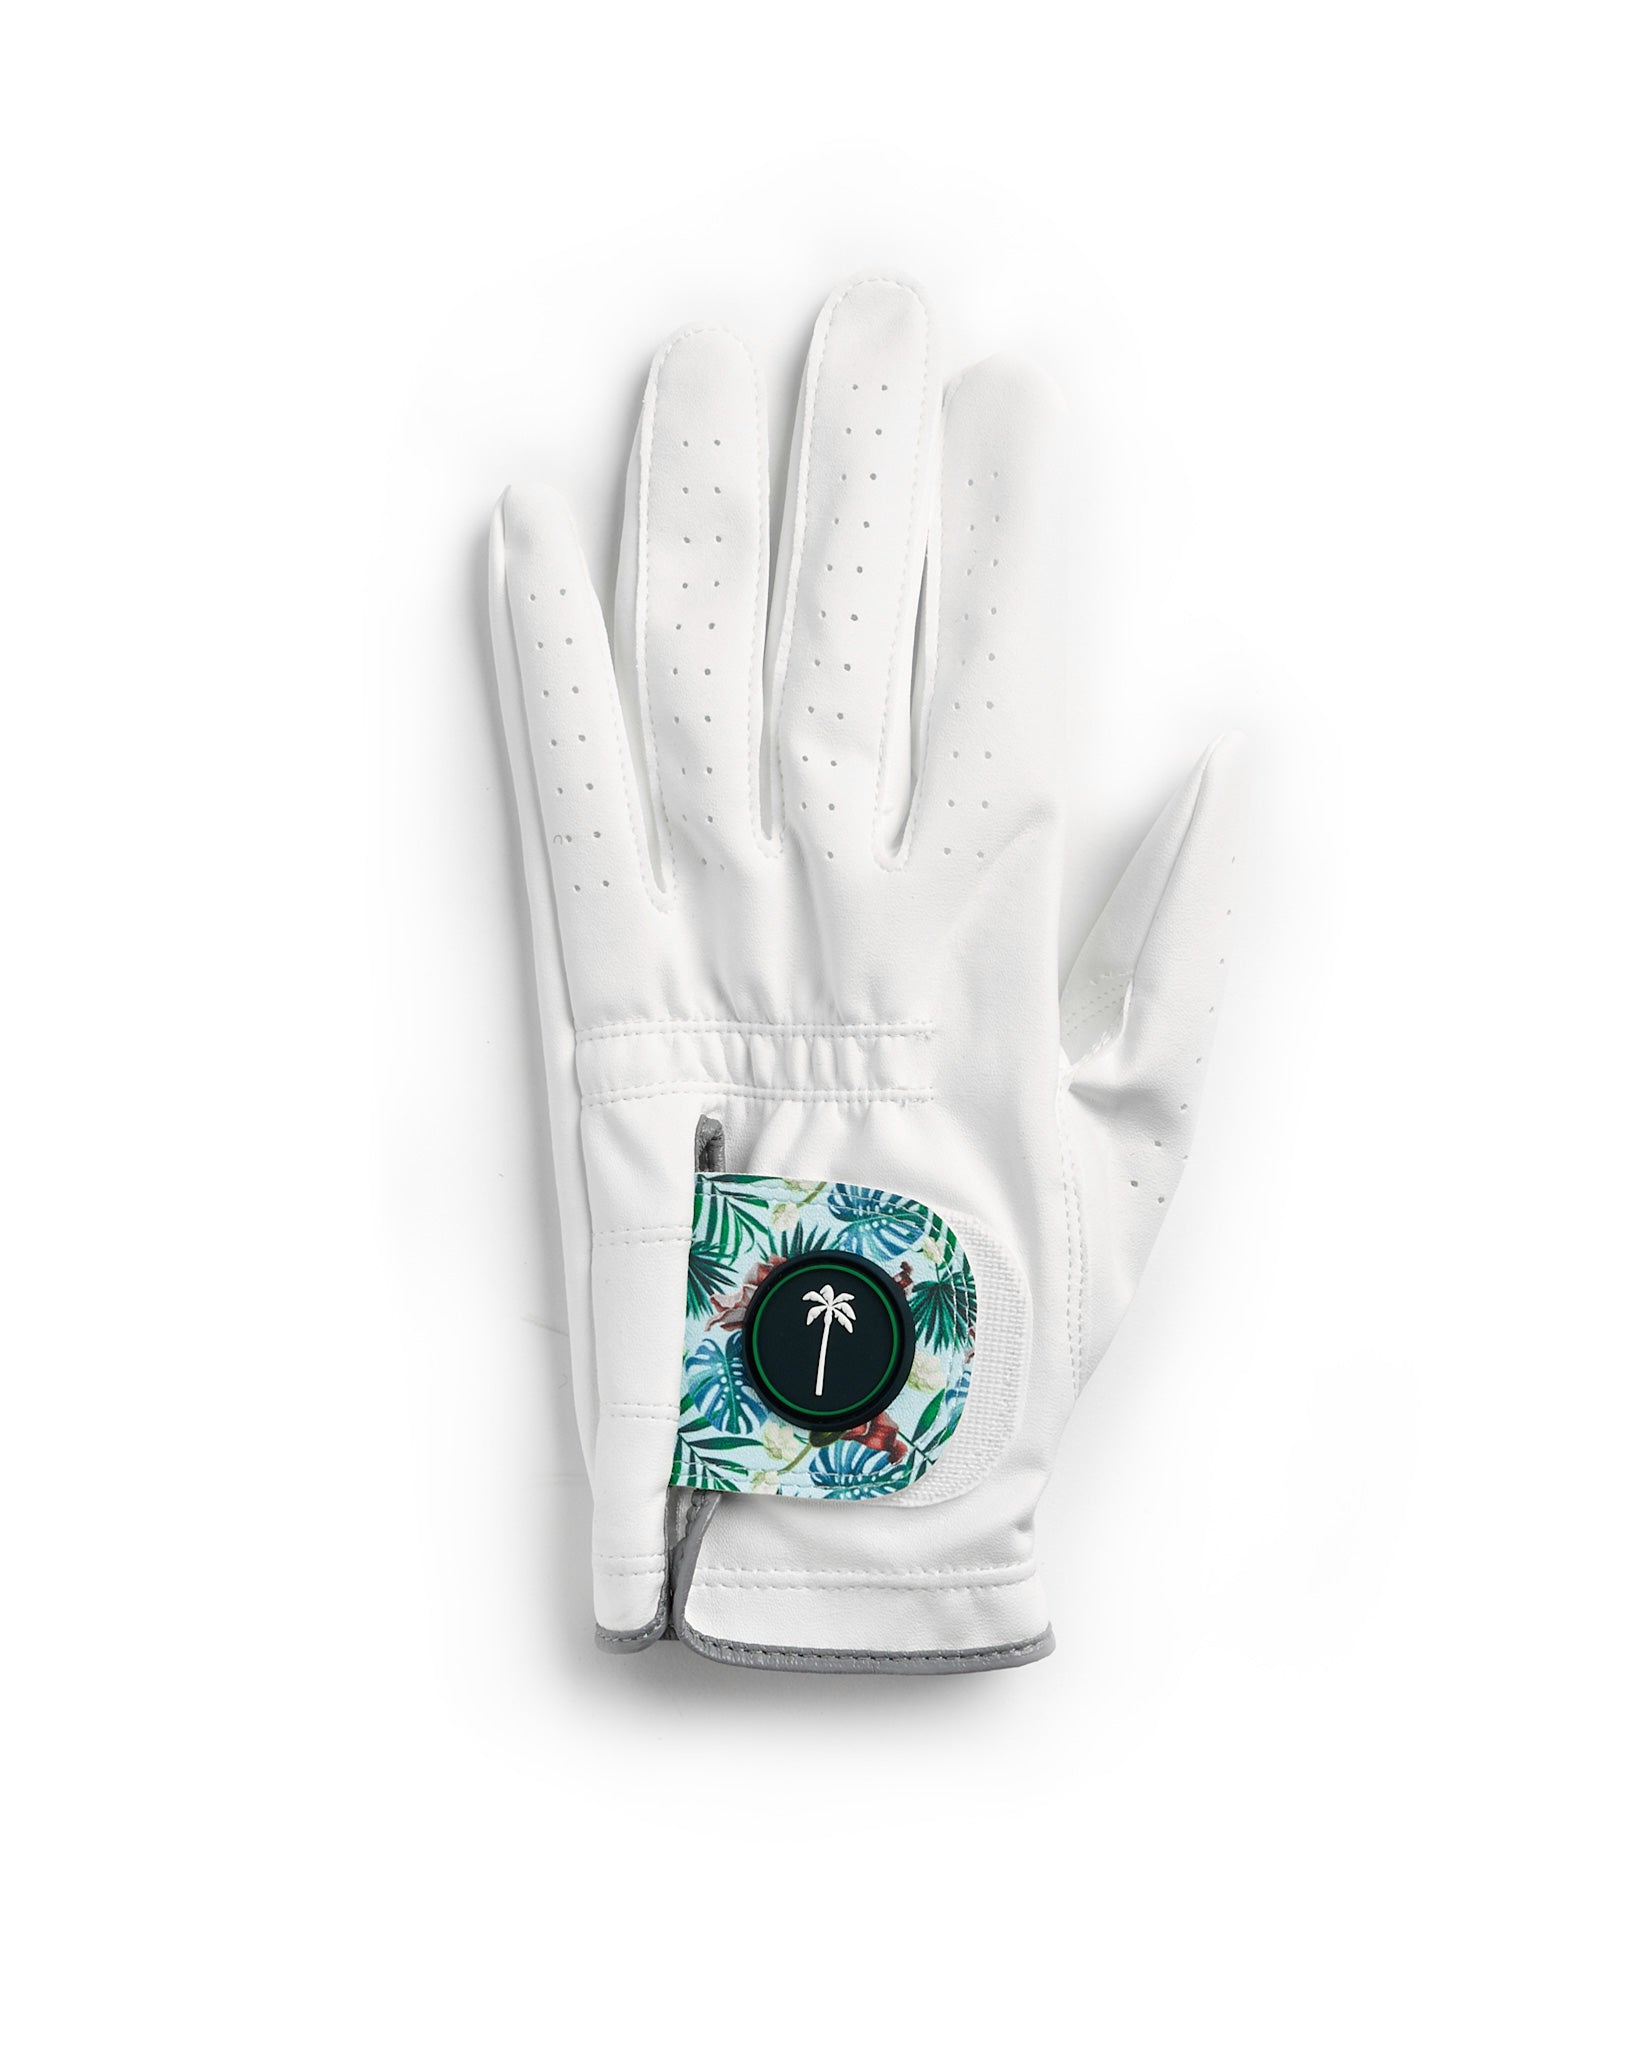 Youth Barrels and Birdies Glove (Vegan Leather) - Palm Golf Co.